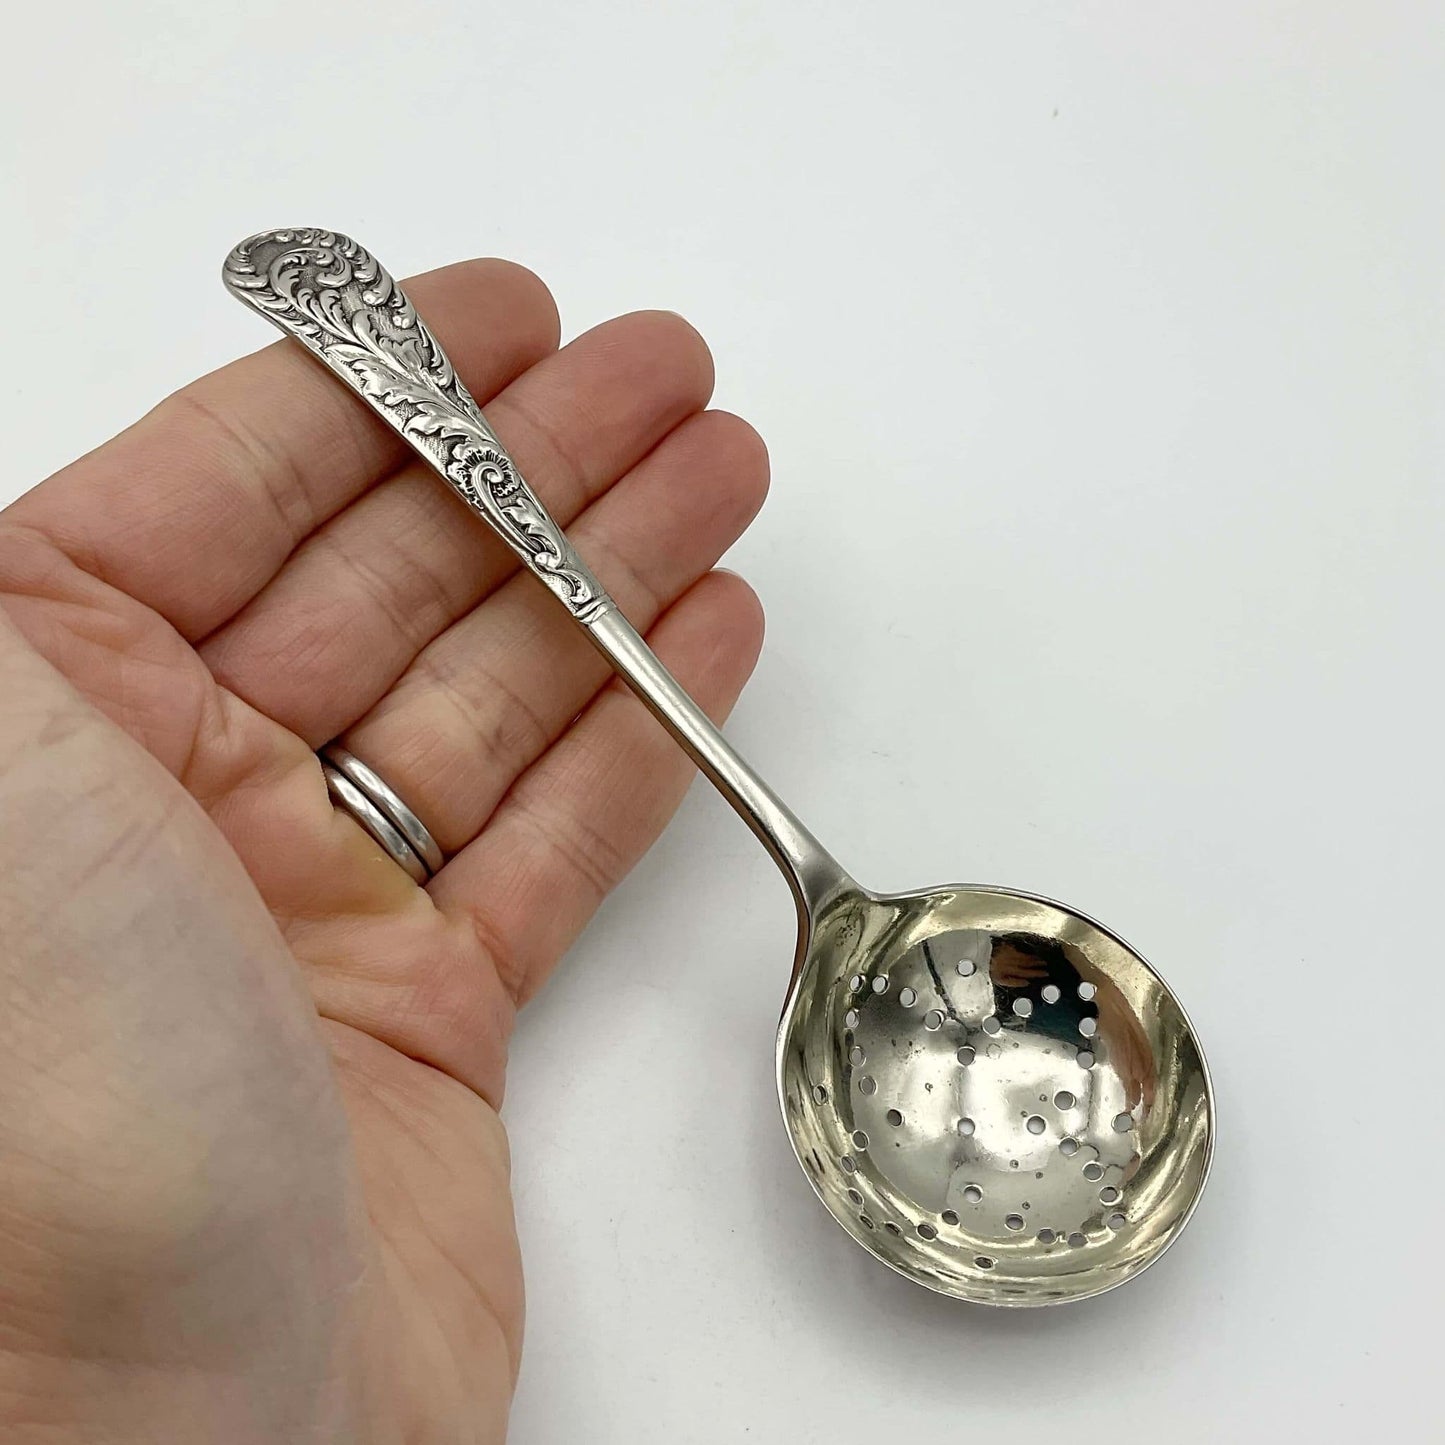 Antique Silver Plated Sugar Sifter Spoon, Cocoa Spoon